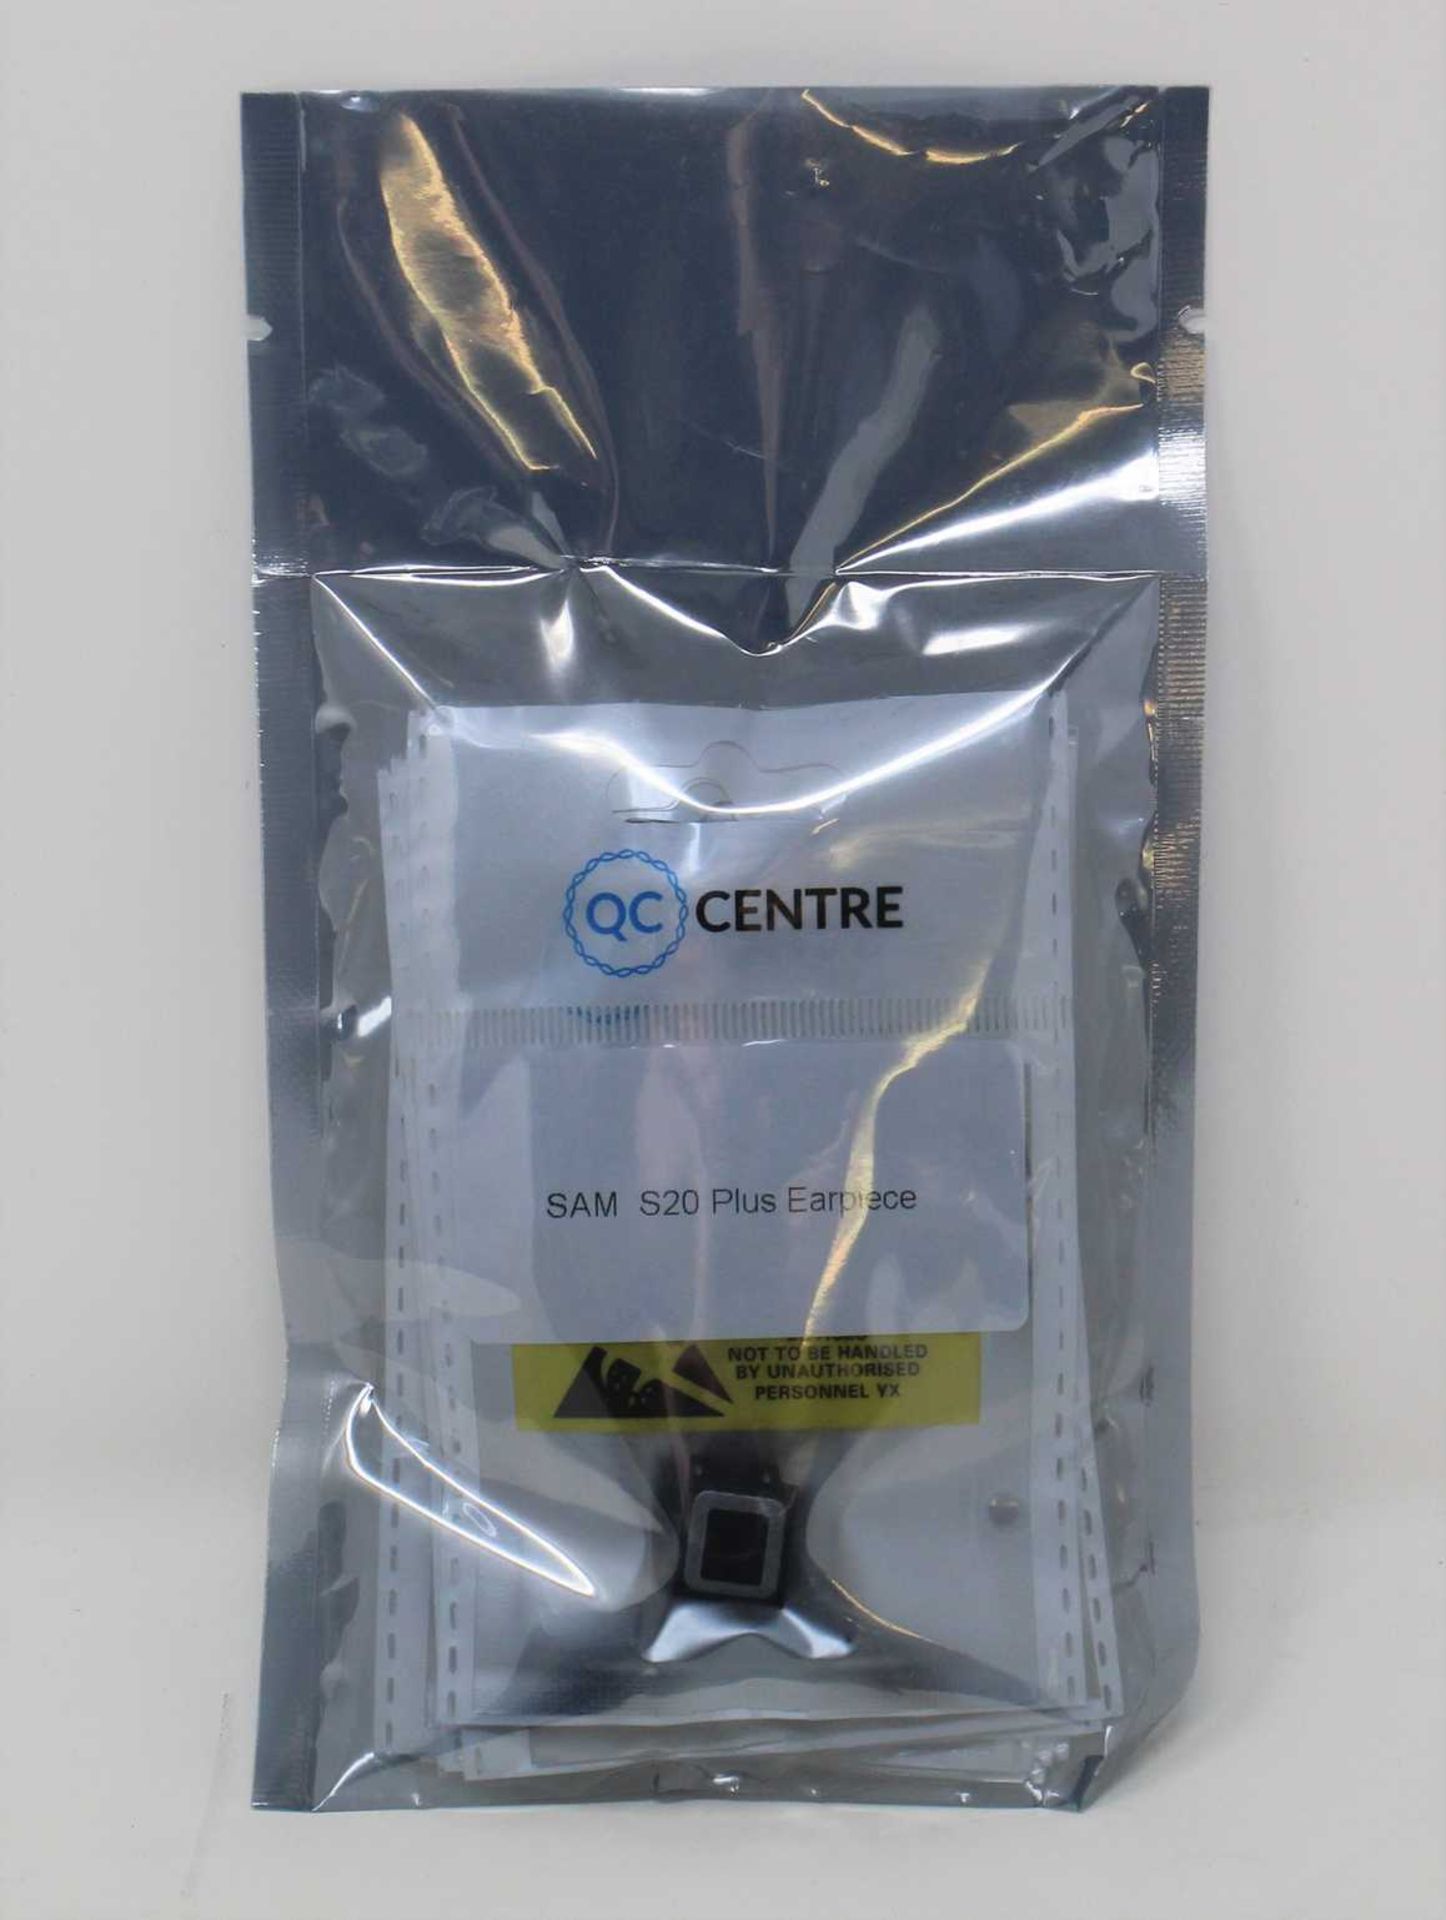 Ten as new QC Centre replacement front cameras for Samsung S20 Plus and two packs of five QC